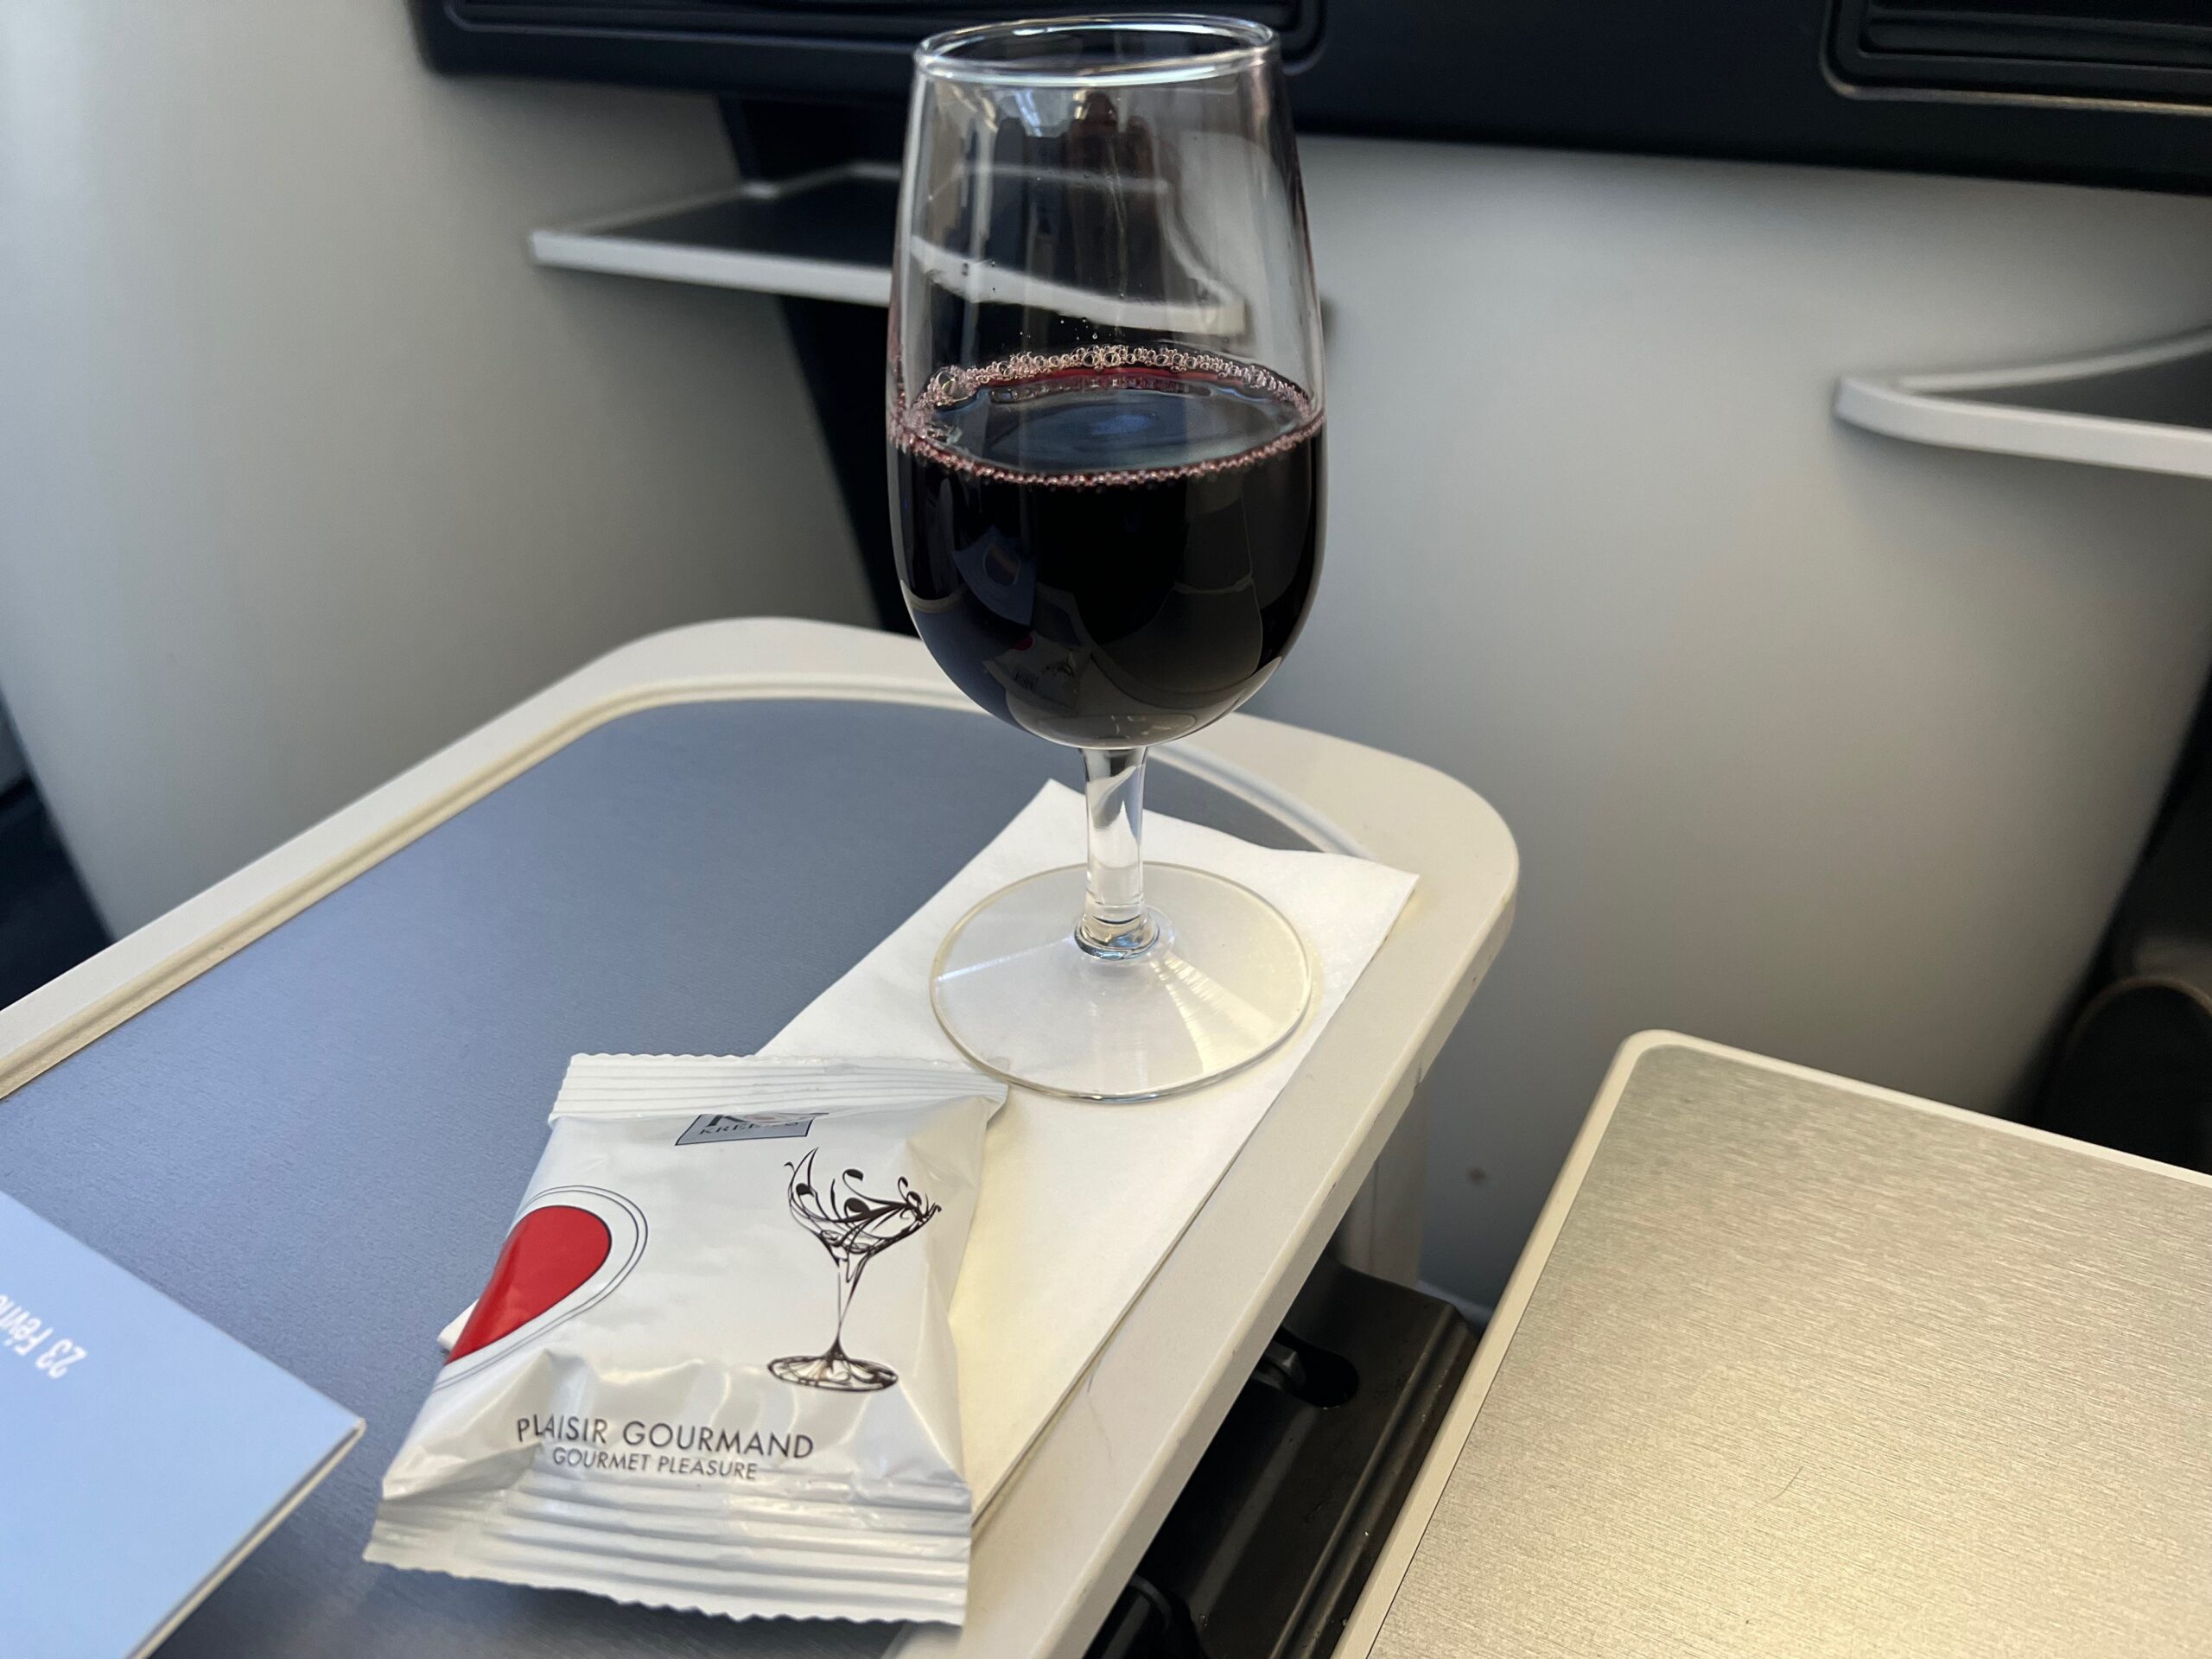 Flying on La Compagnie all-business class airline from Paris to New York &mdash; the wine and nuts.